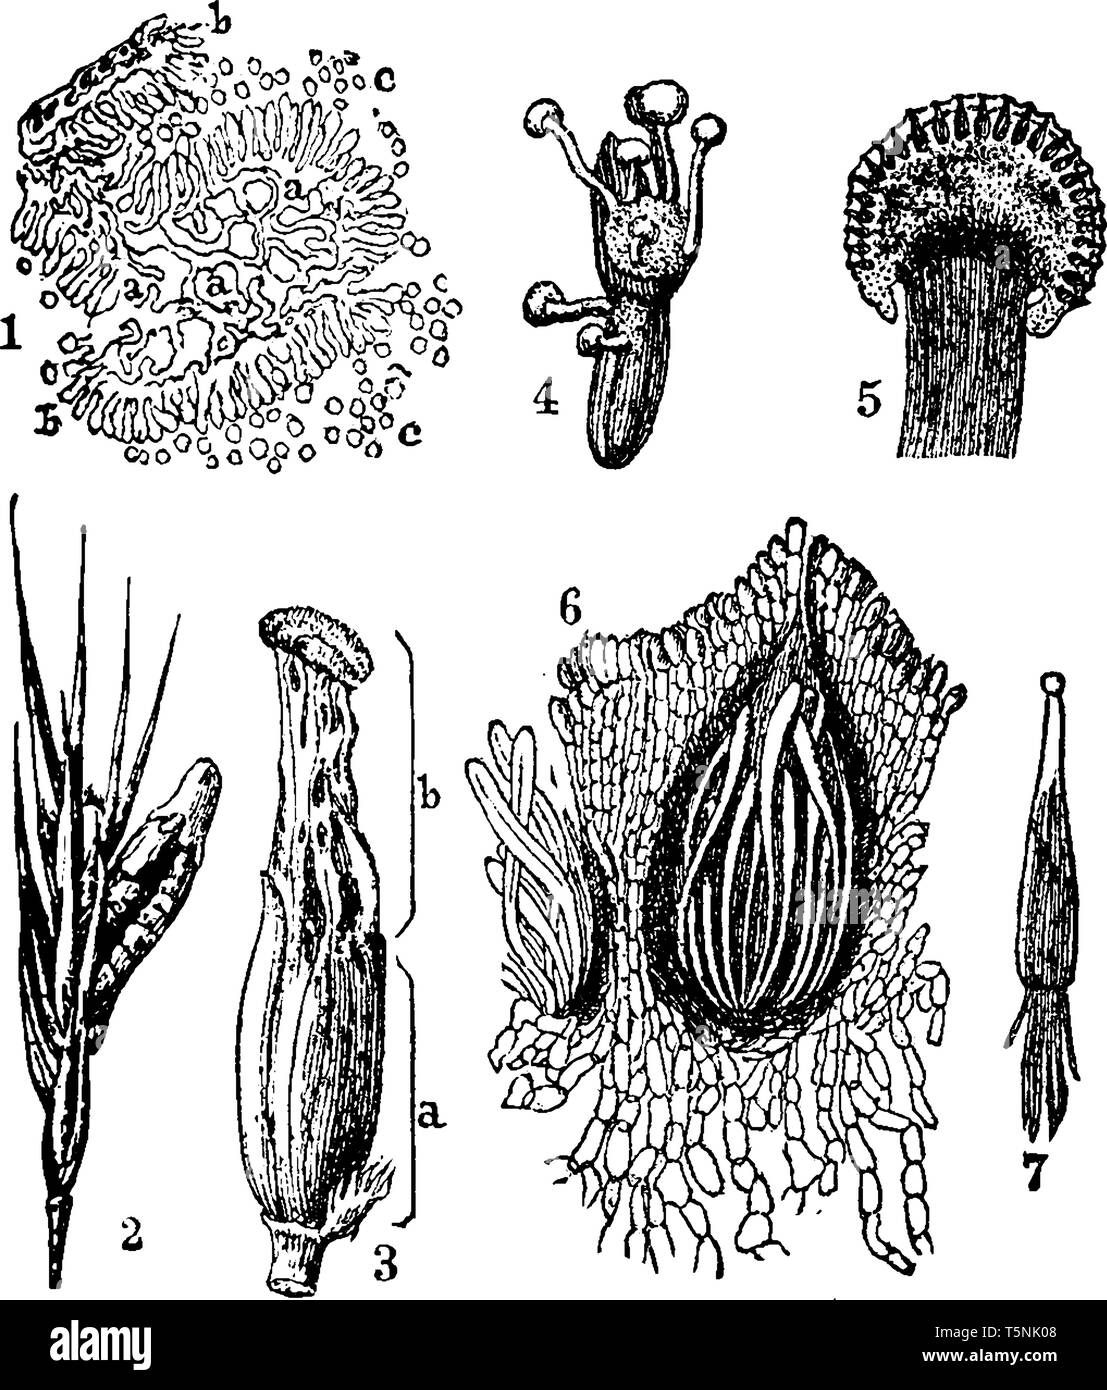 A picture showing different stages of Ergot or ergot fungi which refers to a group of fungi of the genus Claviceps, vintage line drawing or engraving  Stock Vector